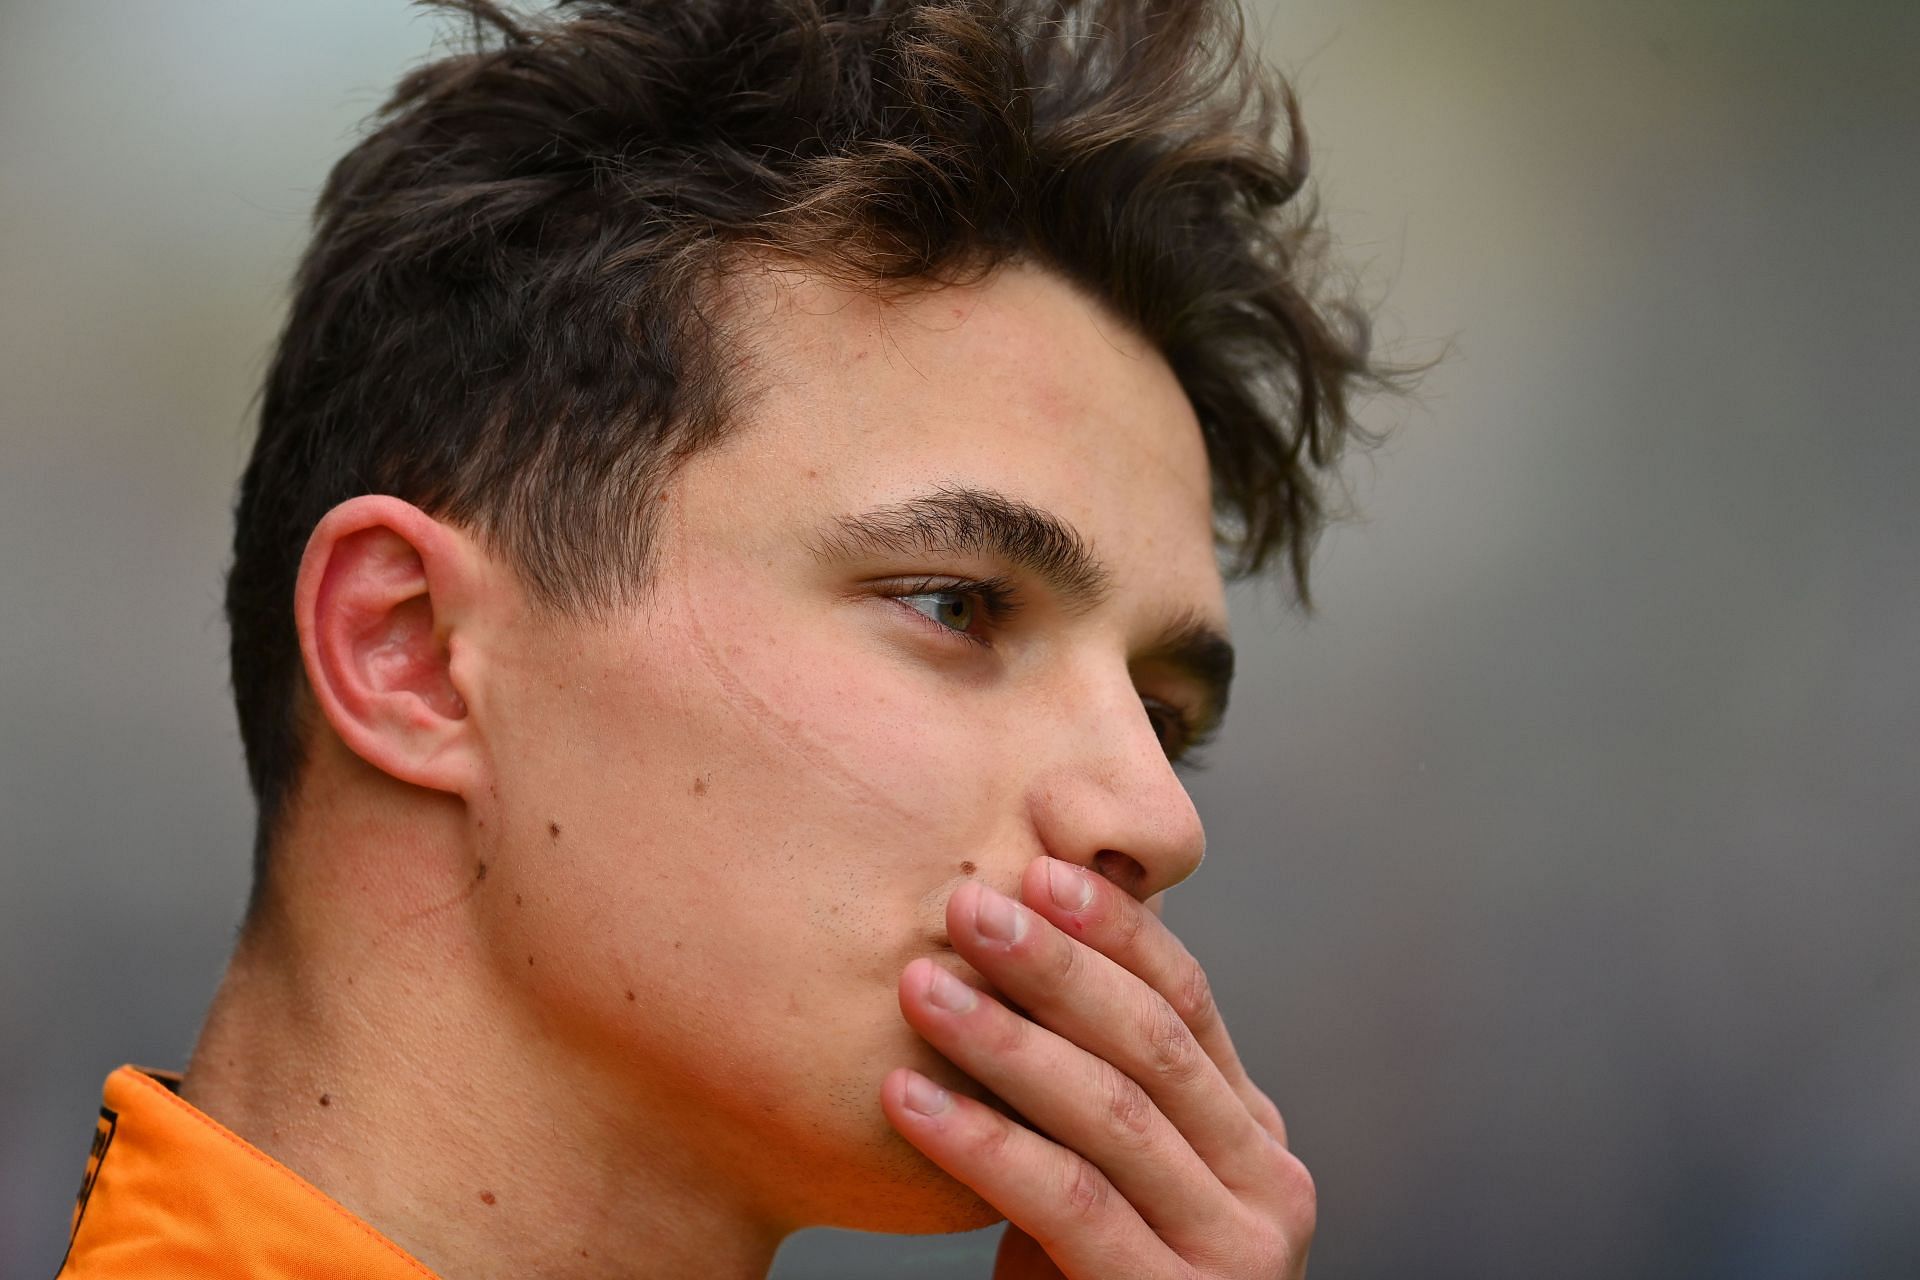 Has Lando Norris made a mistake in signing the longterm contract with